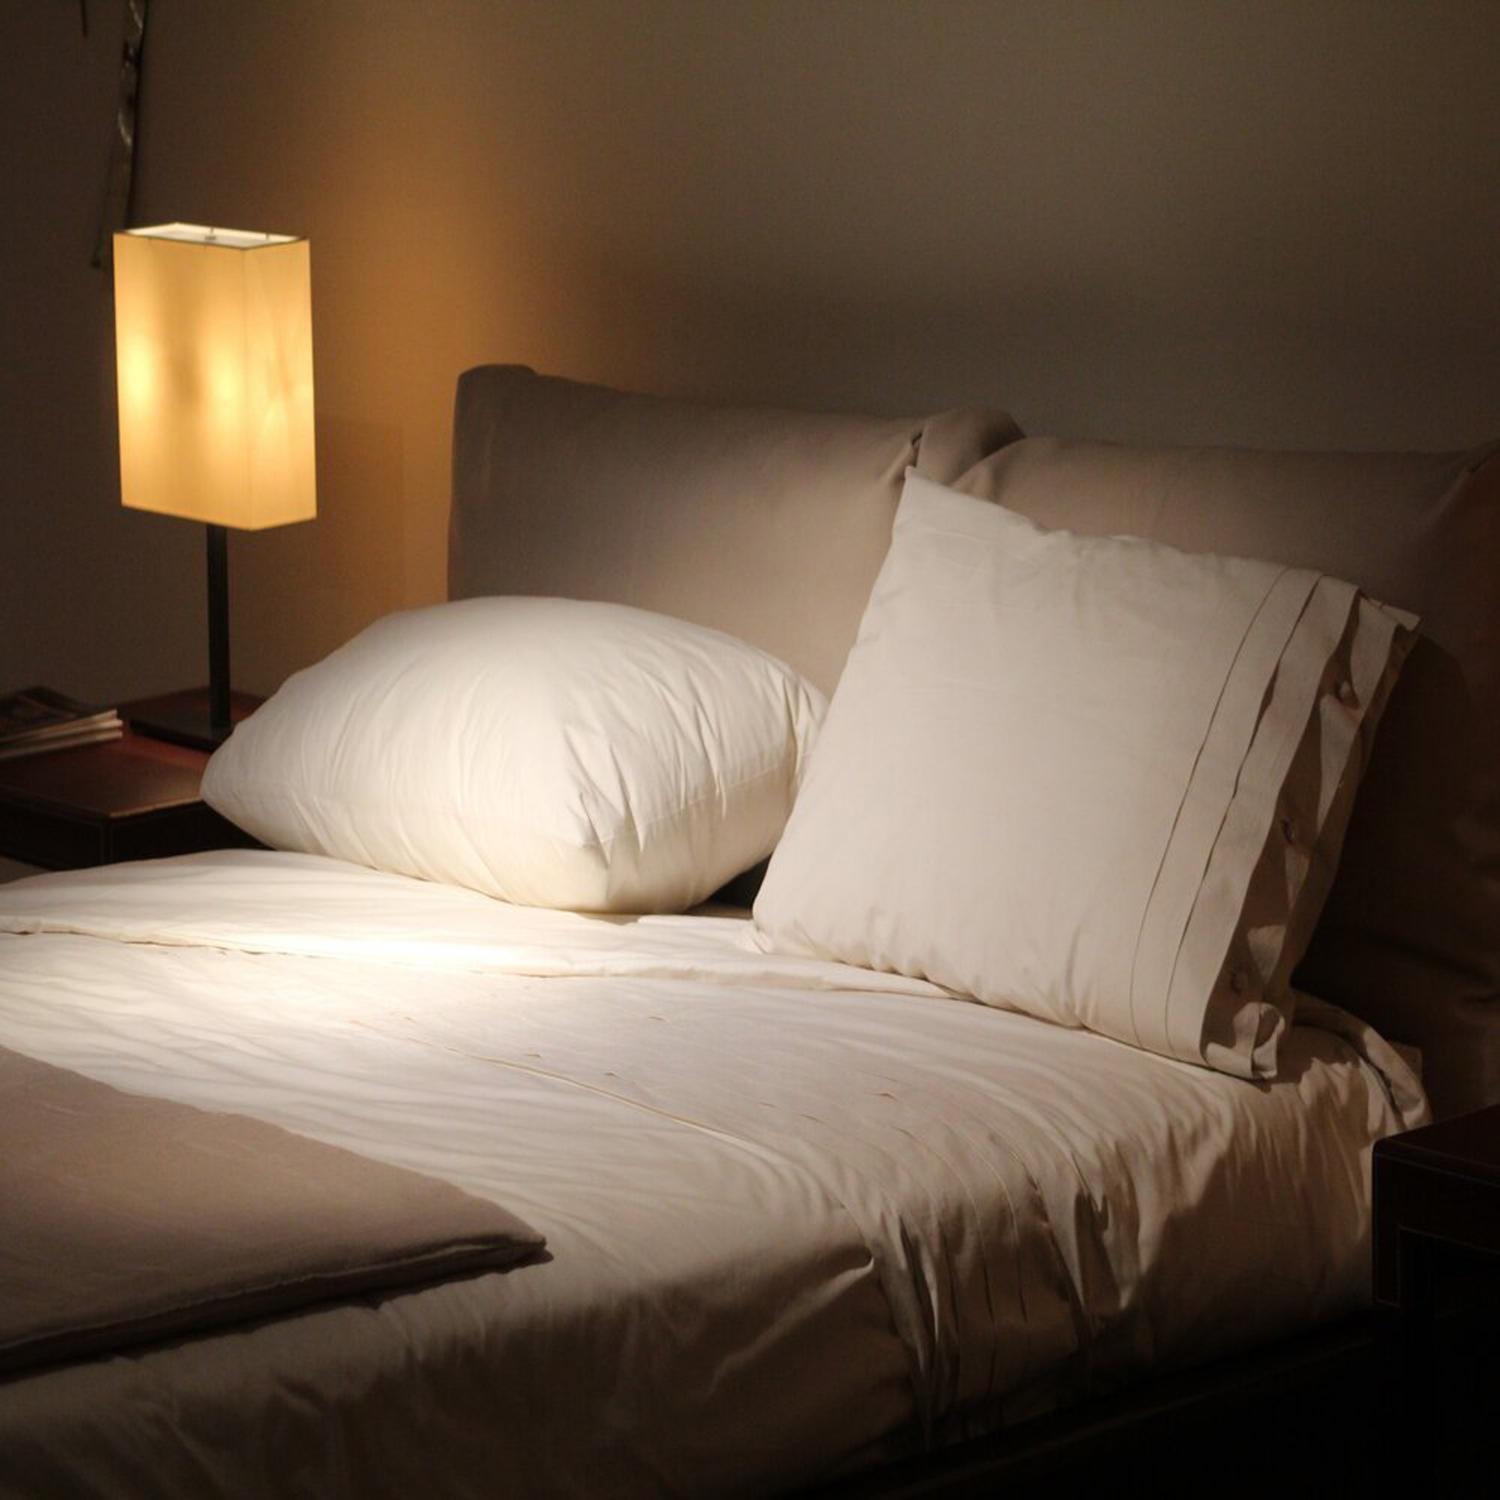 A Good Night's Sleep - 20 Loopable Relaxing Rain Sounds to Beat Insomnia